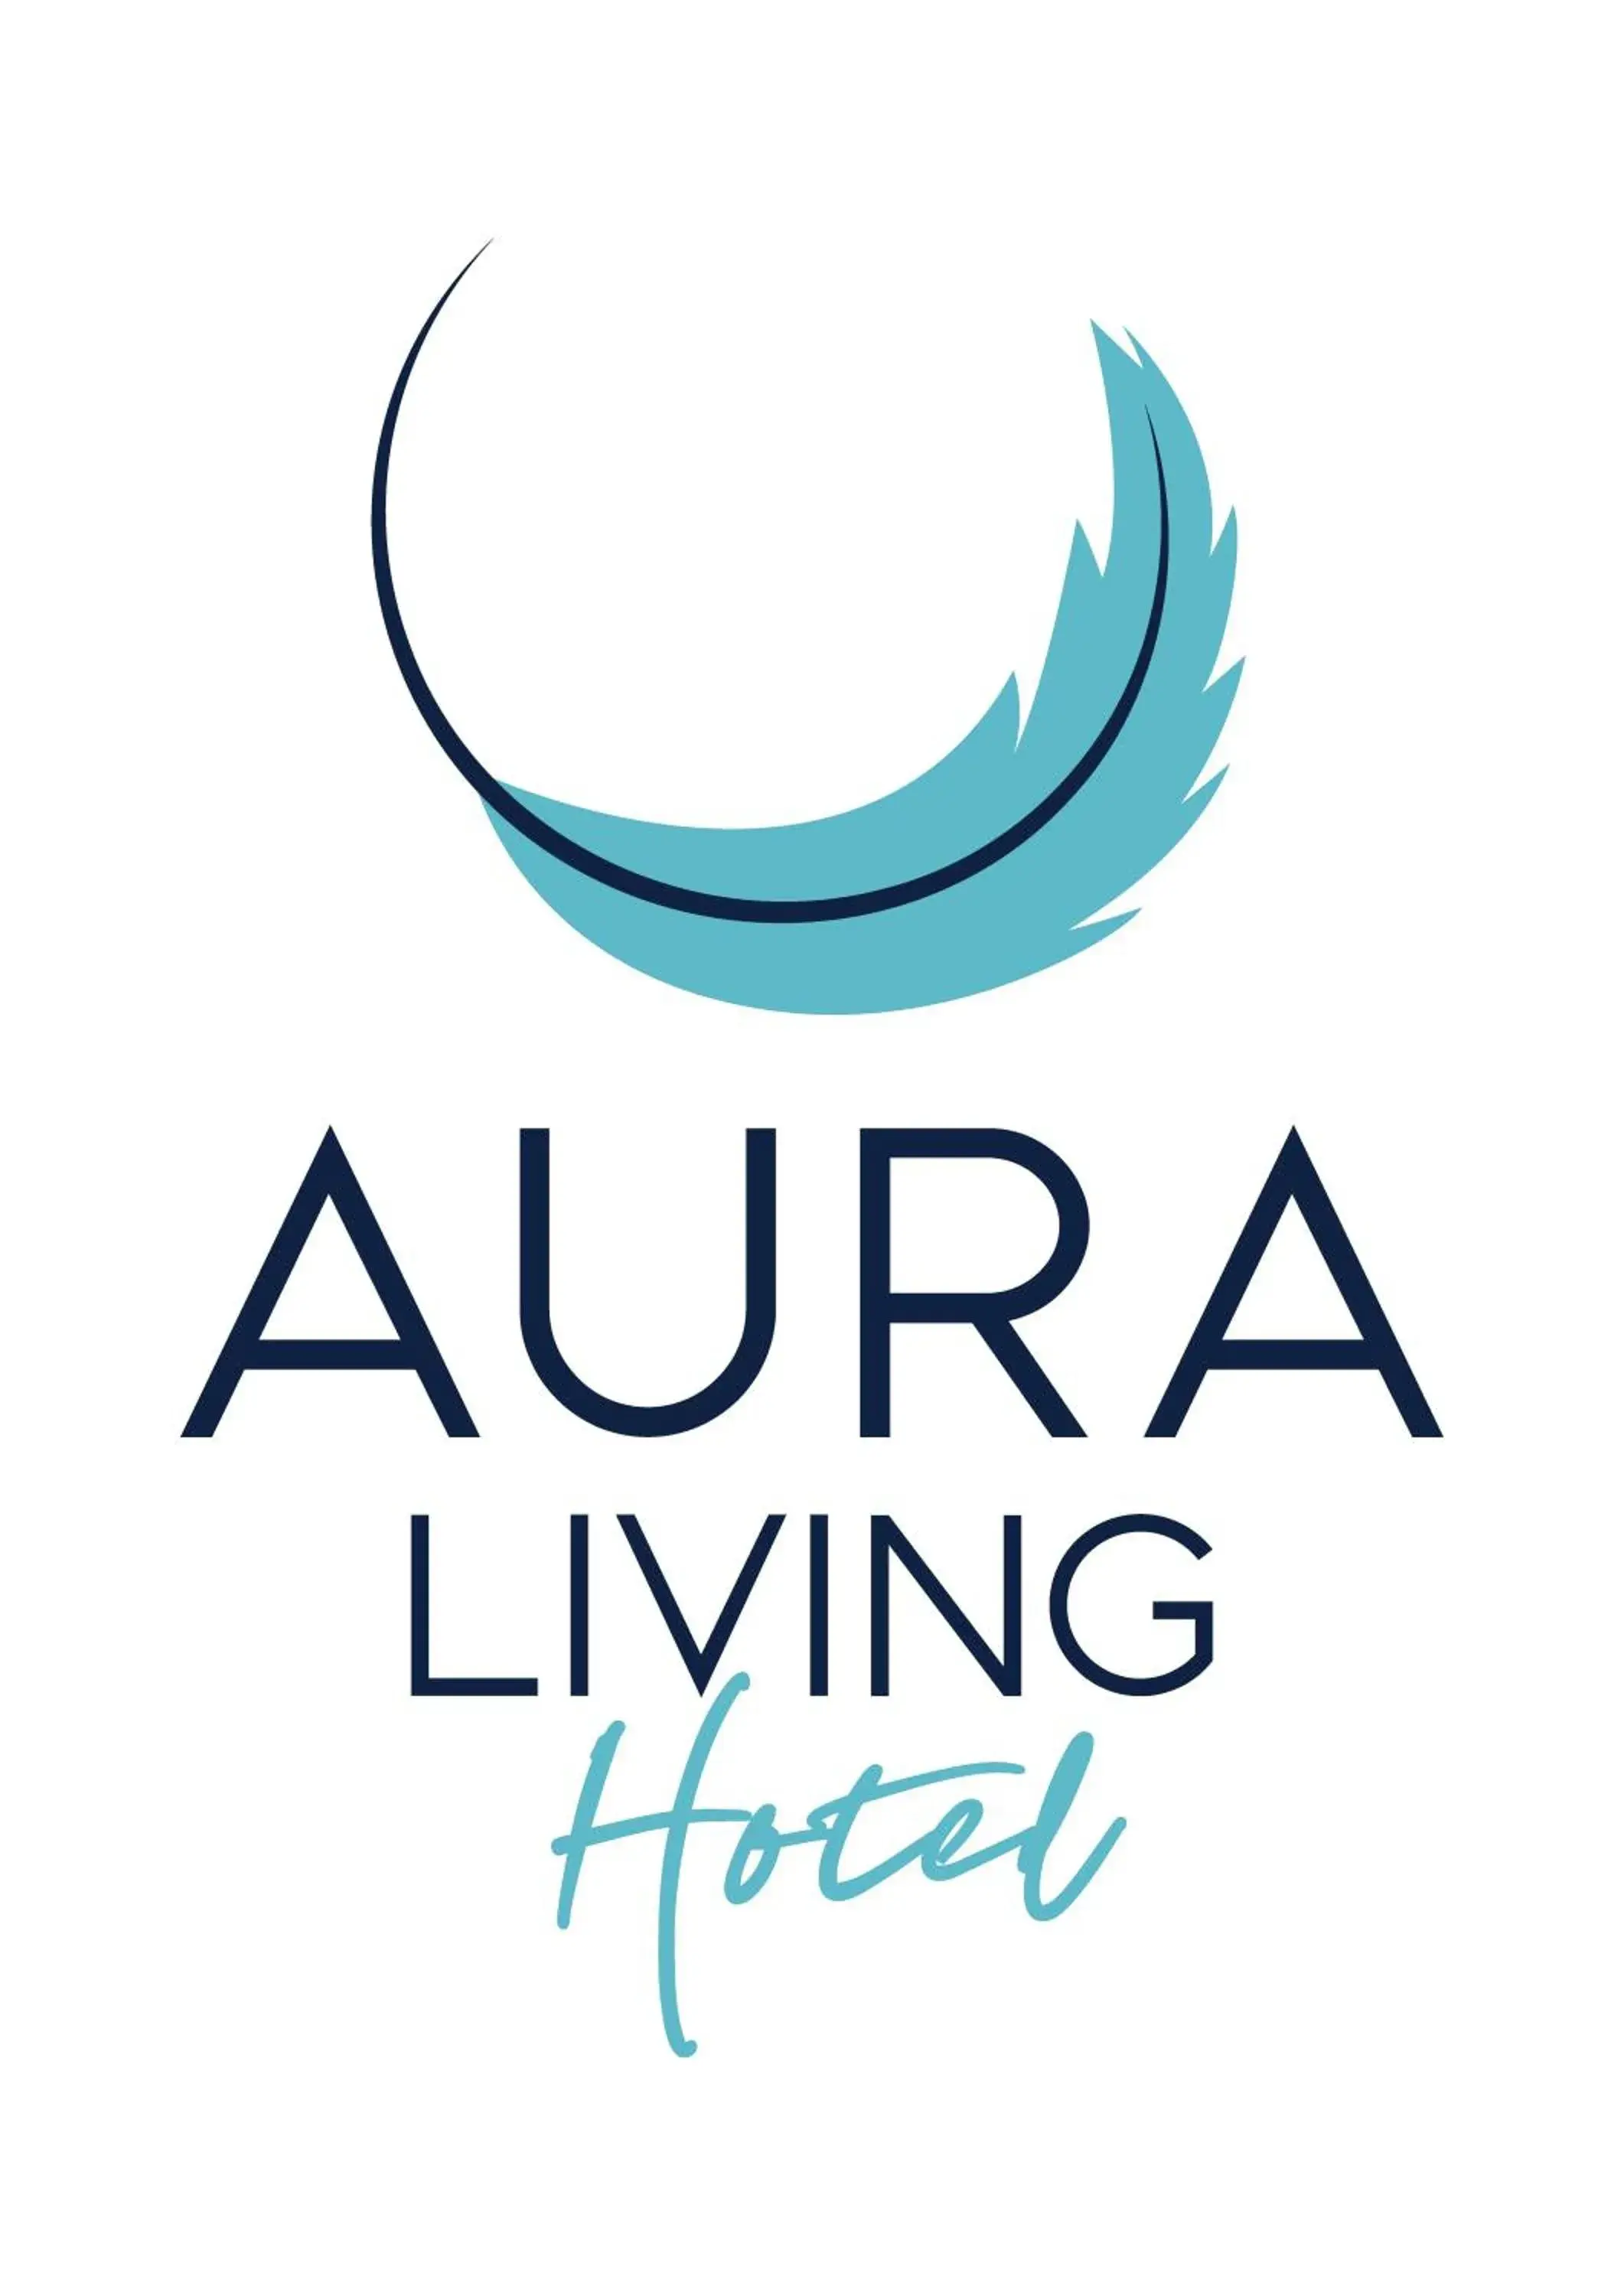 Property building in Aura Living Hotel